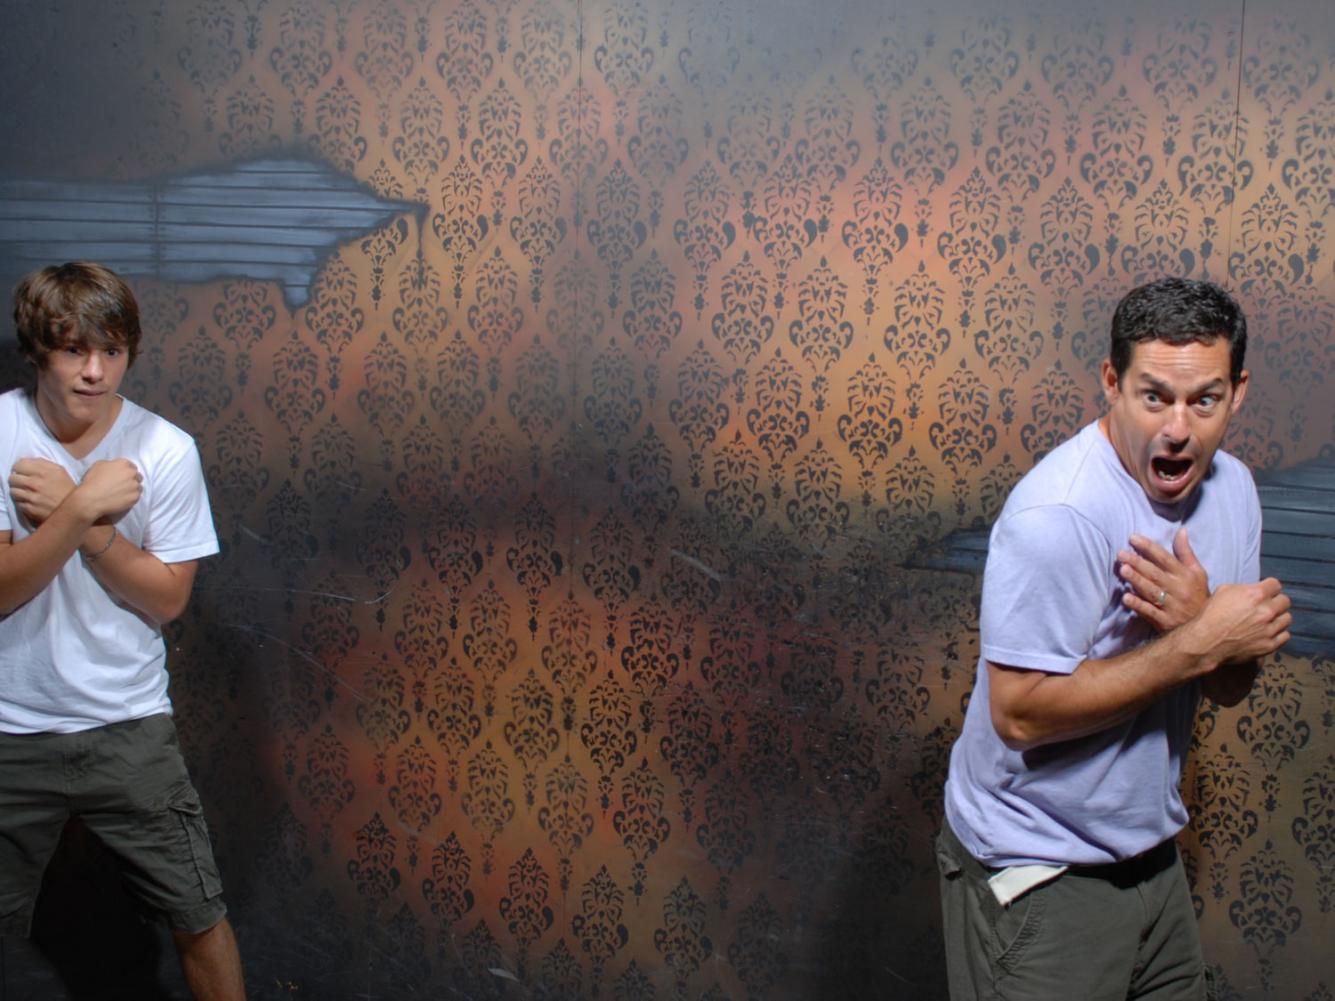 Nightmares Fear Factory Top 40 September 2013 pic0006